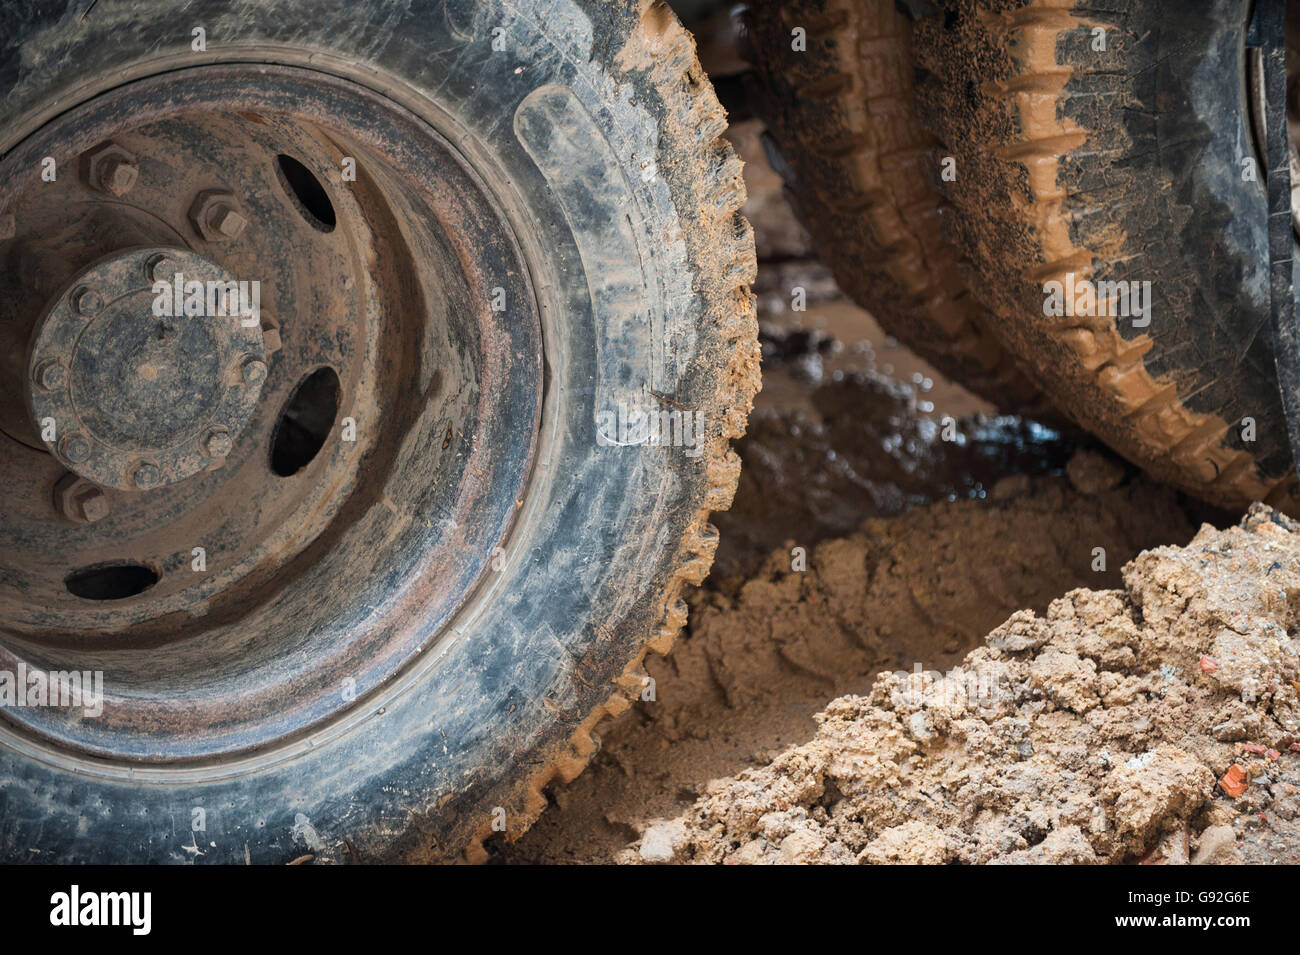 Dirty truck wheels in muddy road Stock Photo